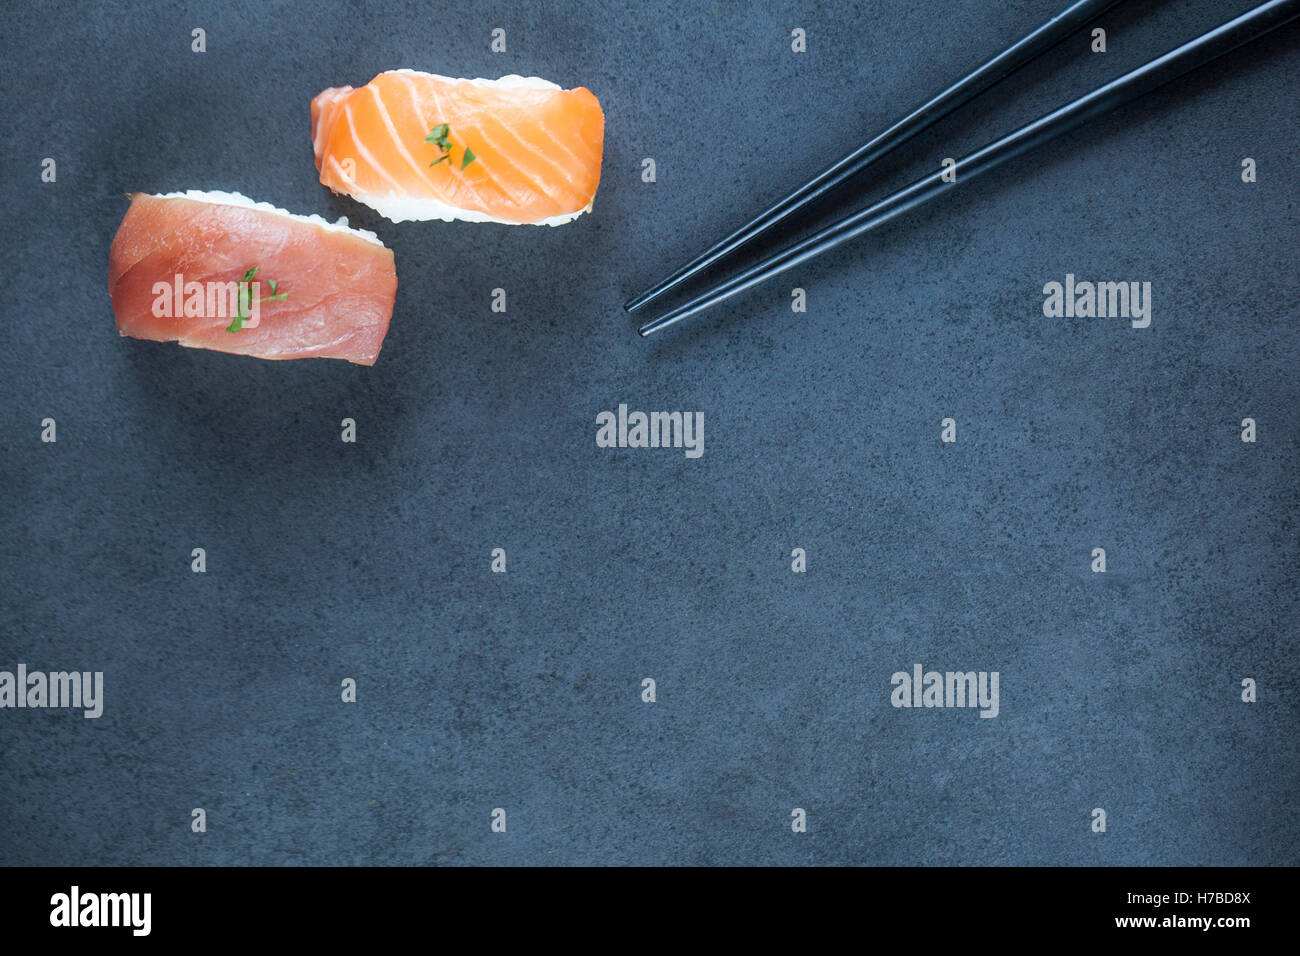 Close-up view of fresh tuna and salmon nigiri and chopsticks on a dark plate with copy space. Stock Photo